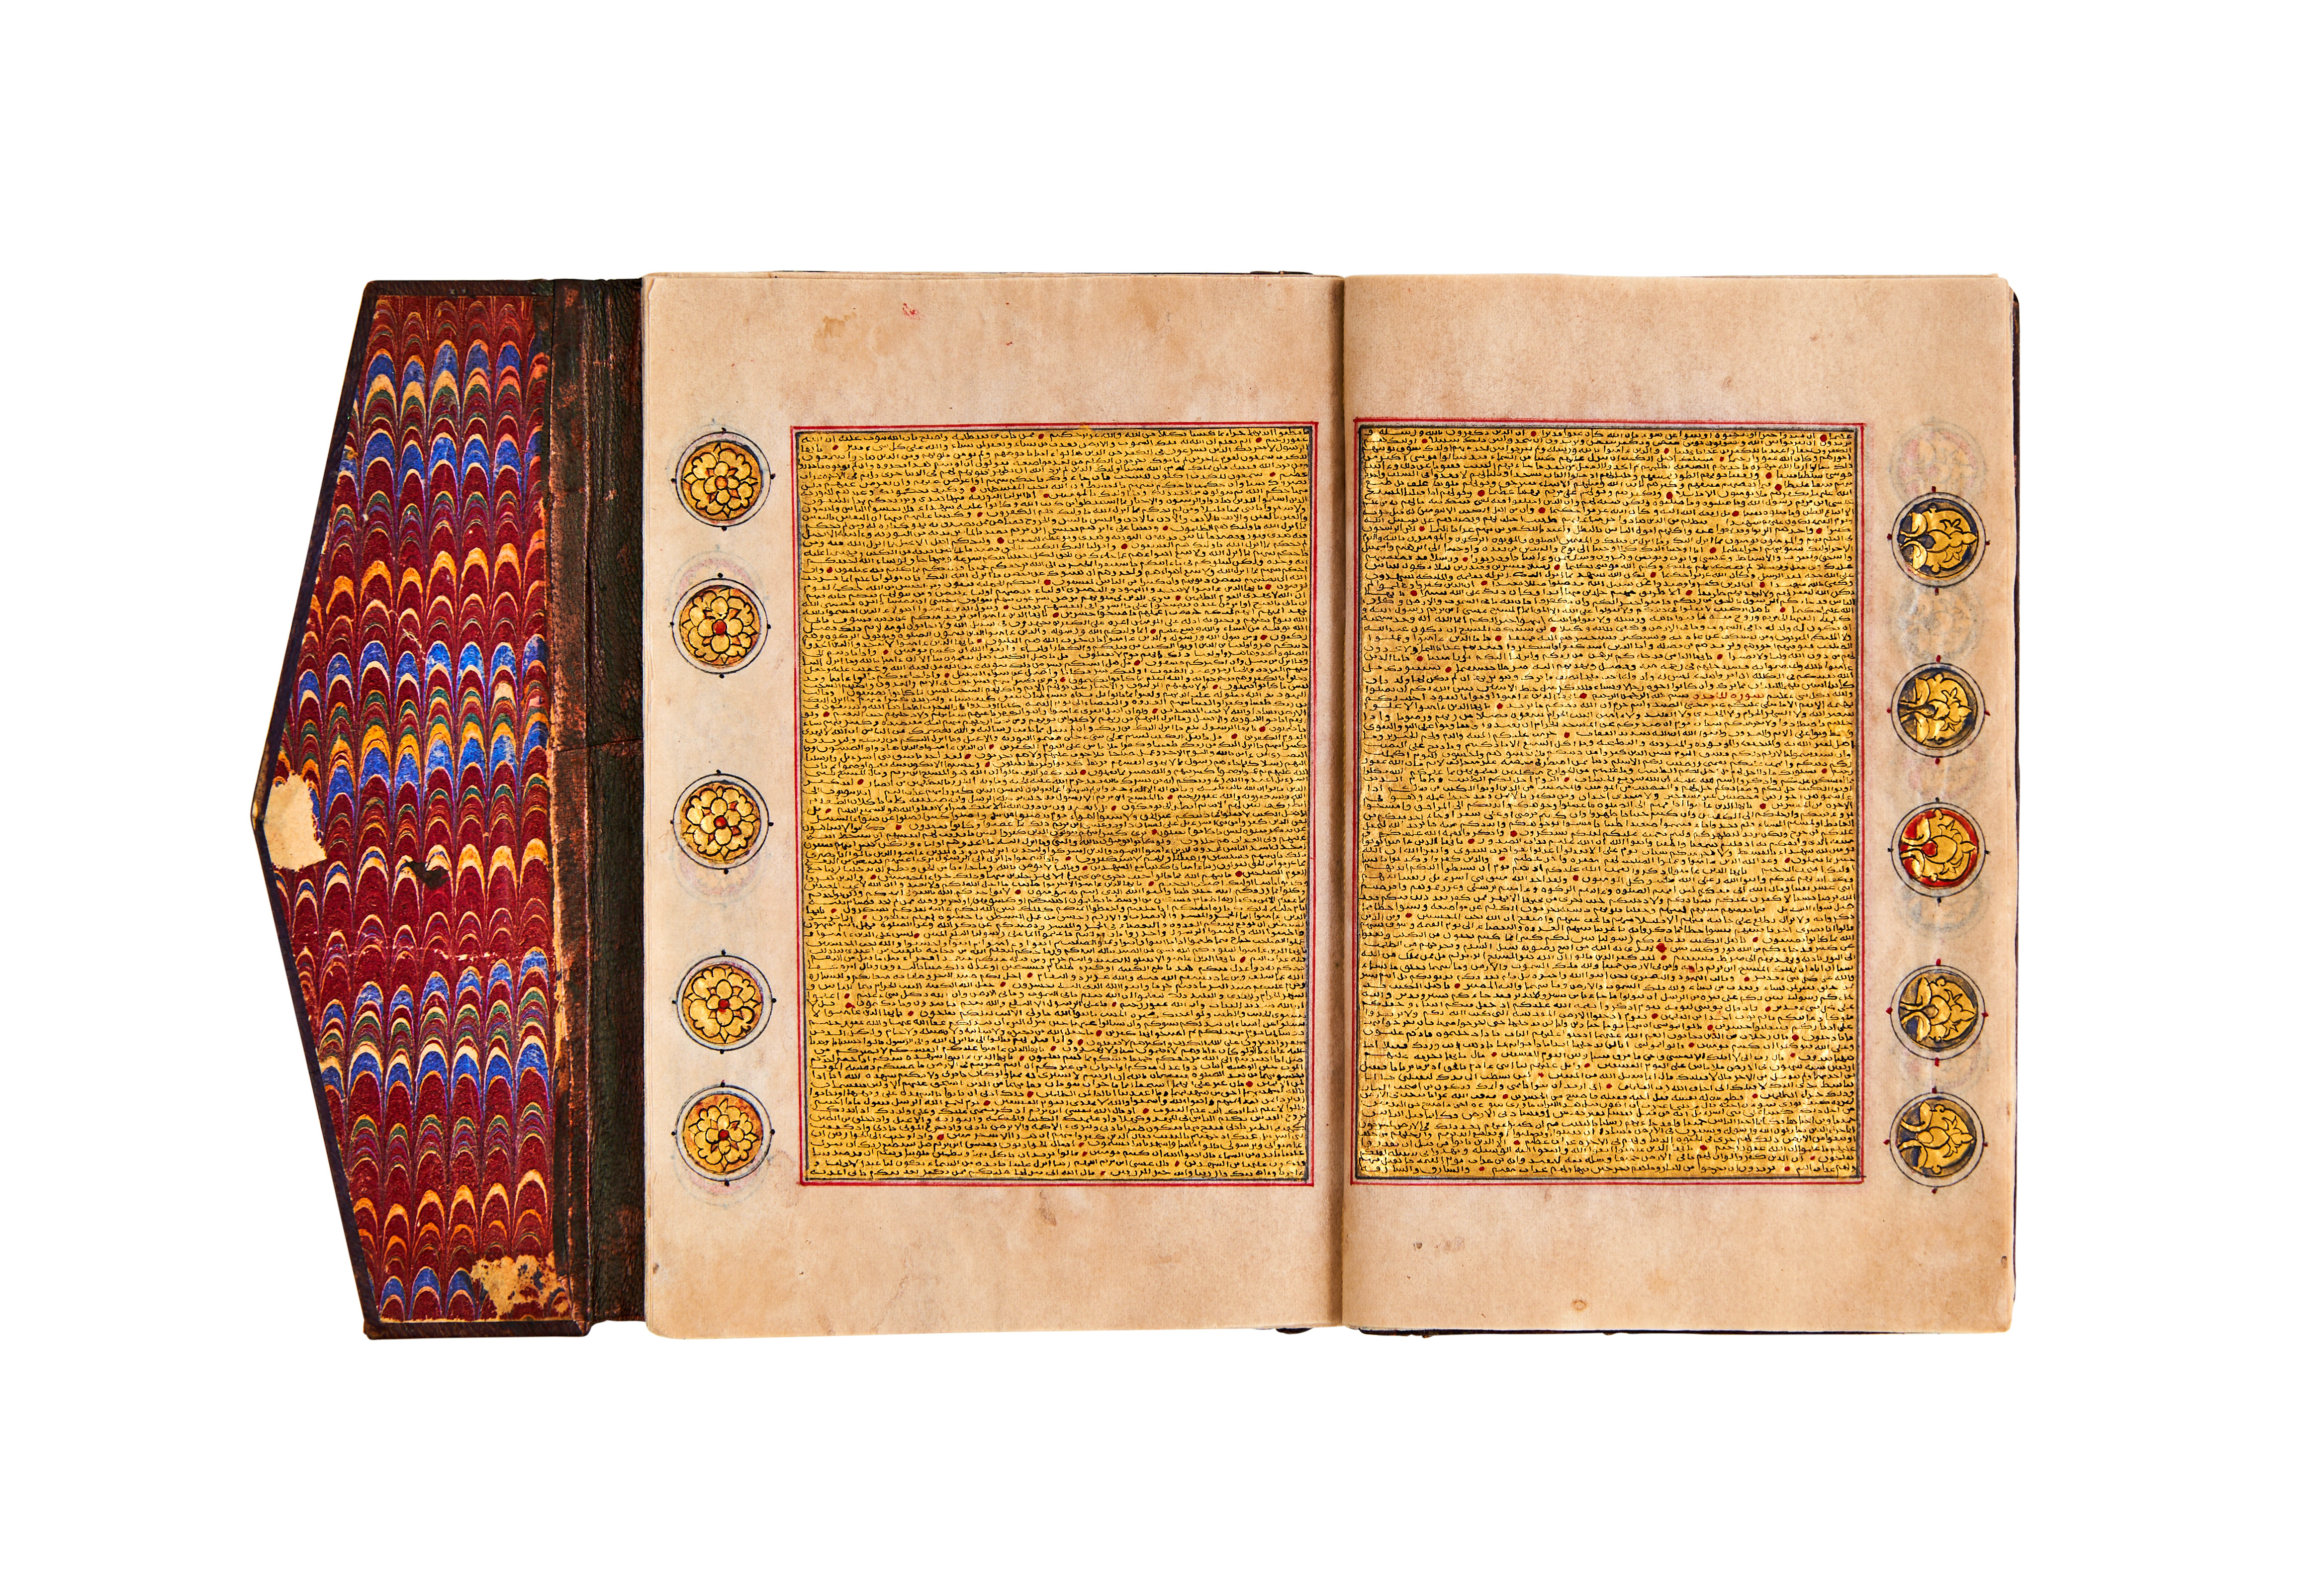 A COMPLETE GOLD MINIATURE QURAN, FOR HIS EXCELLENCE ABU ABDALLAH YUSEF, DATED 1288AH, COPIED BY FAT - Image 5 of 9